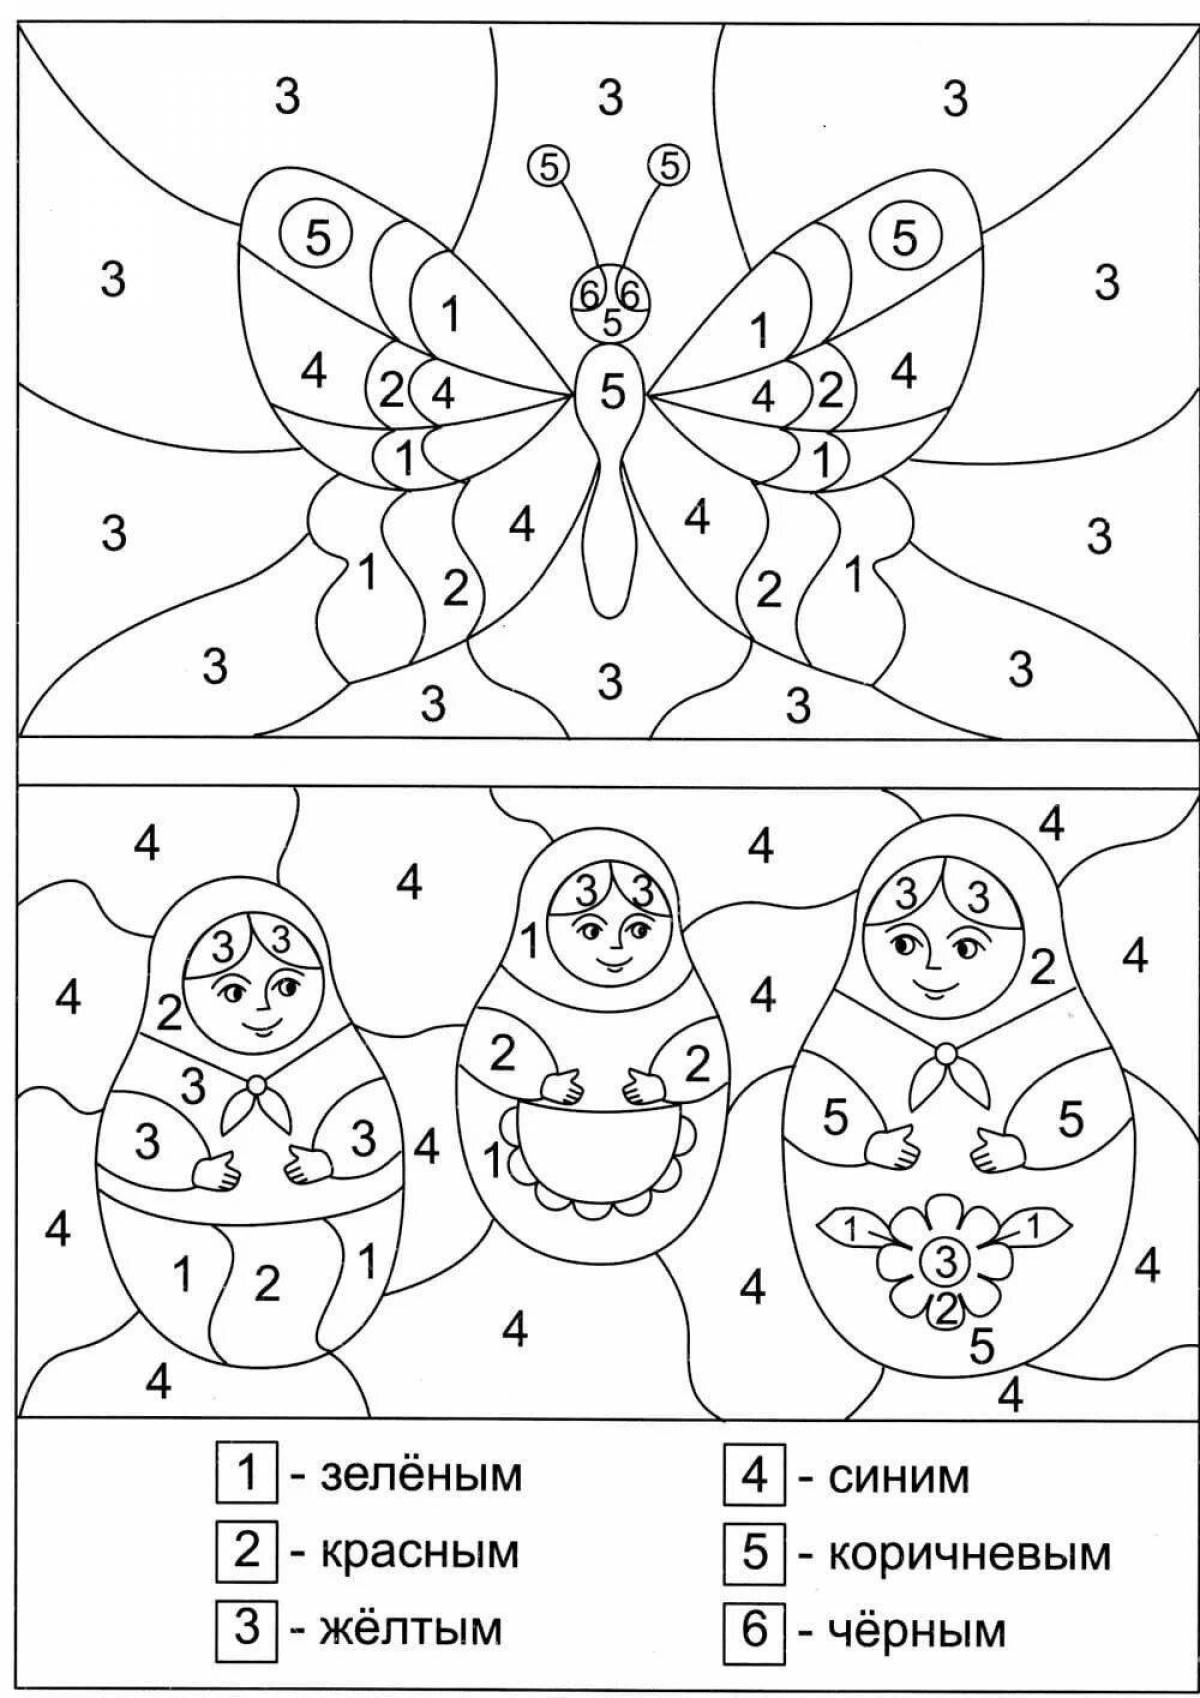 Color-frenzy coloring page by numbers 4 years